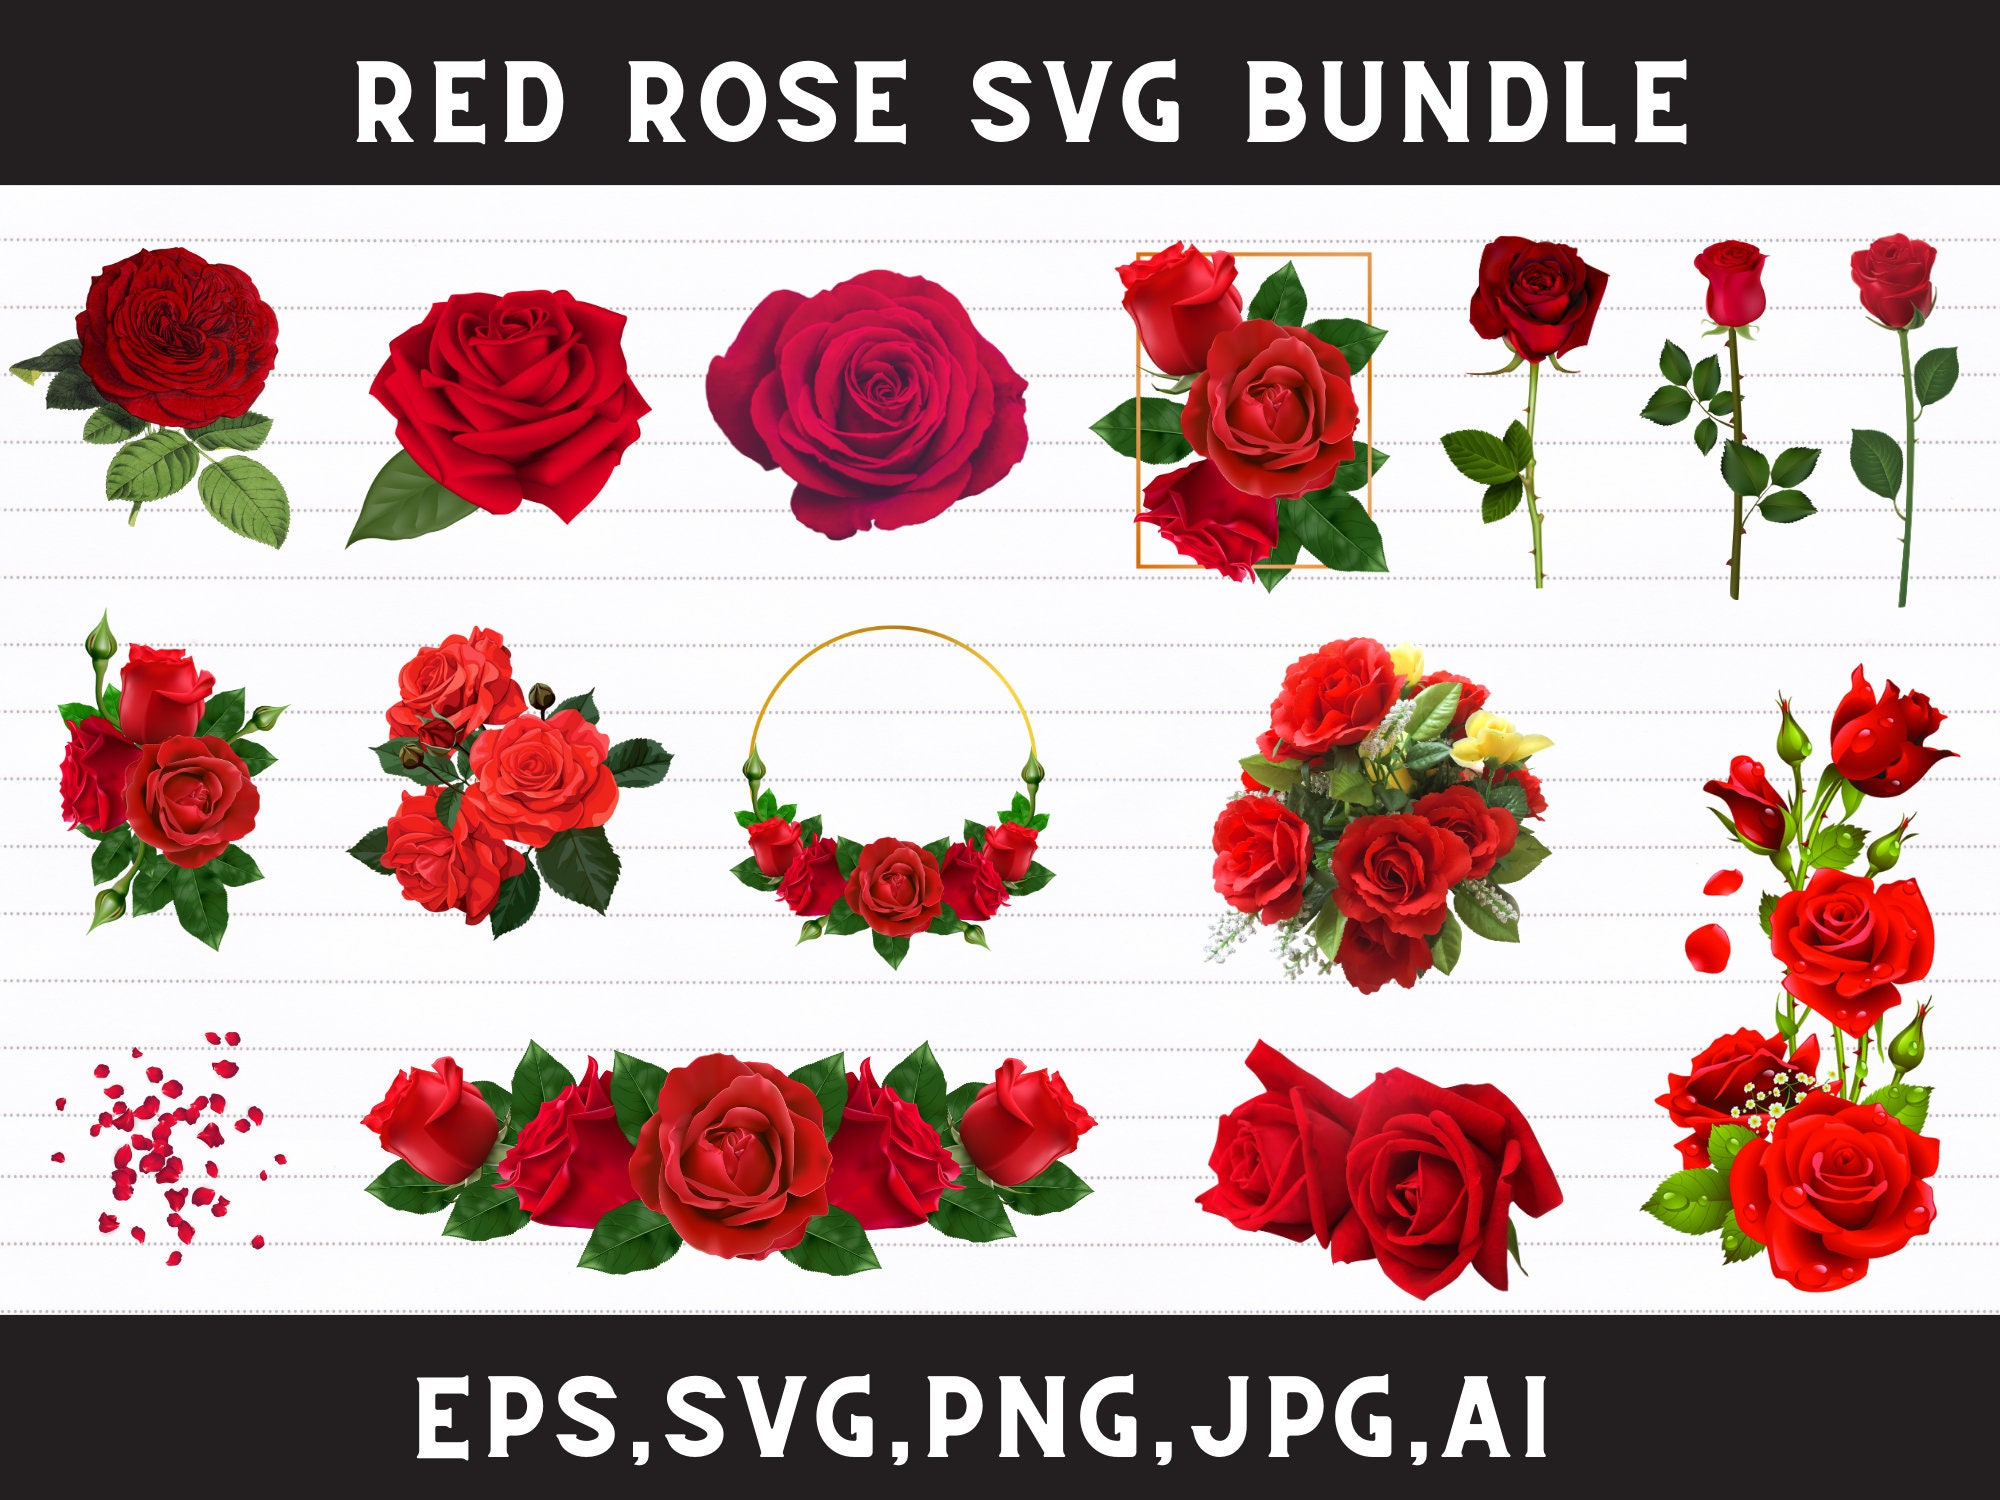 Flower SVG, Rose SVG, Floral Clipart Graphic by 99SiamVector